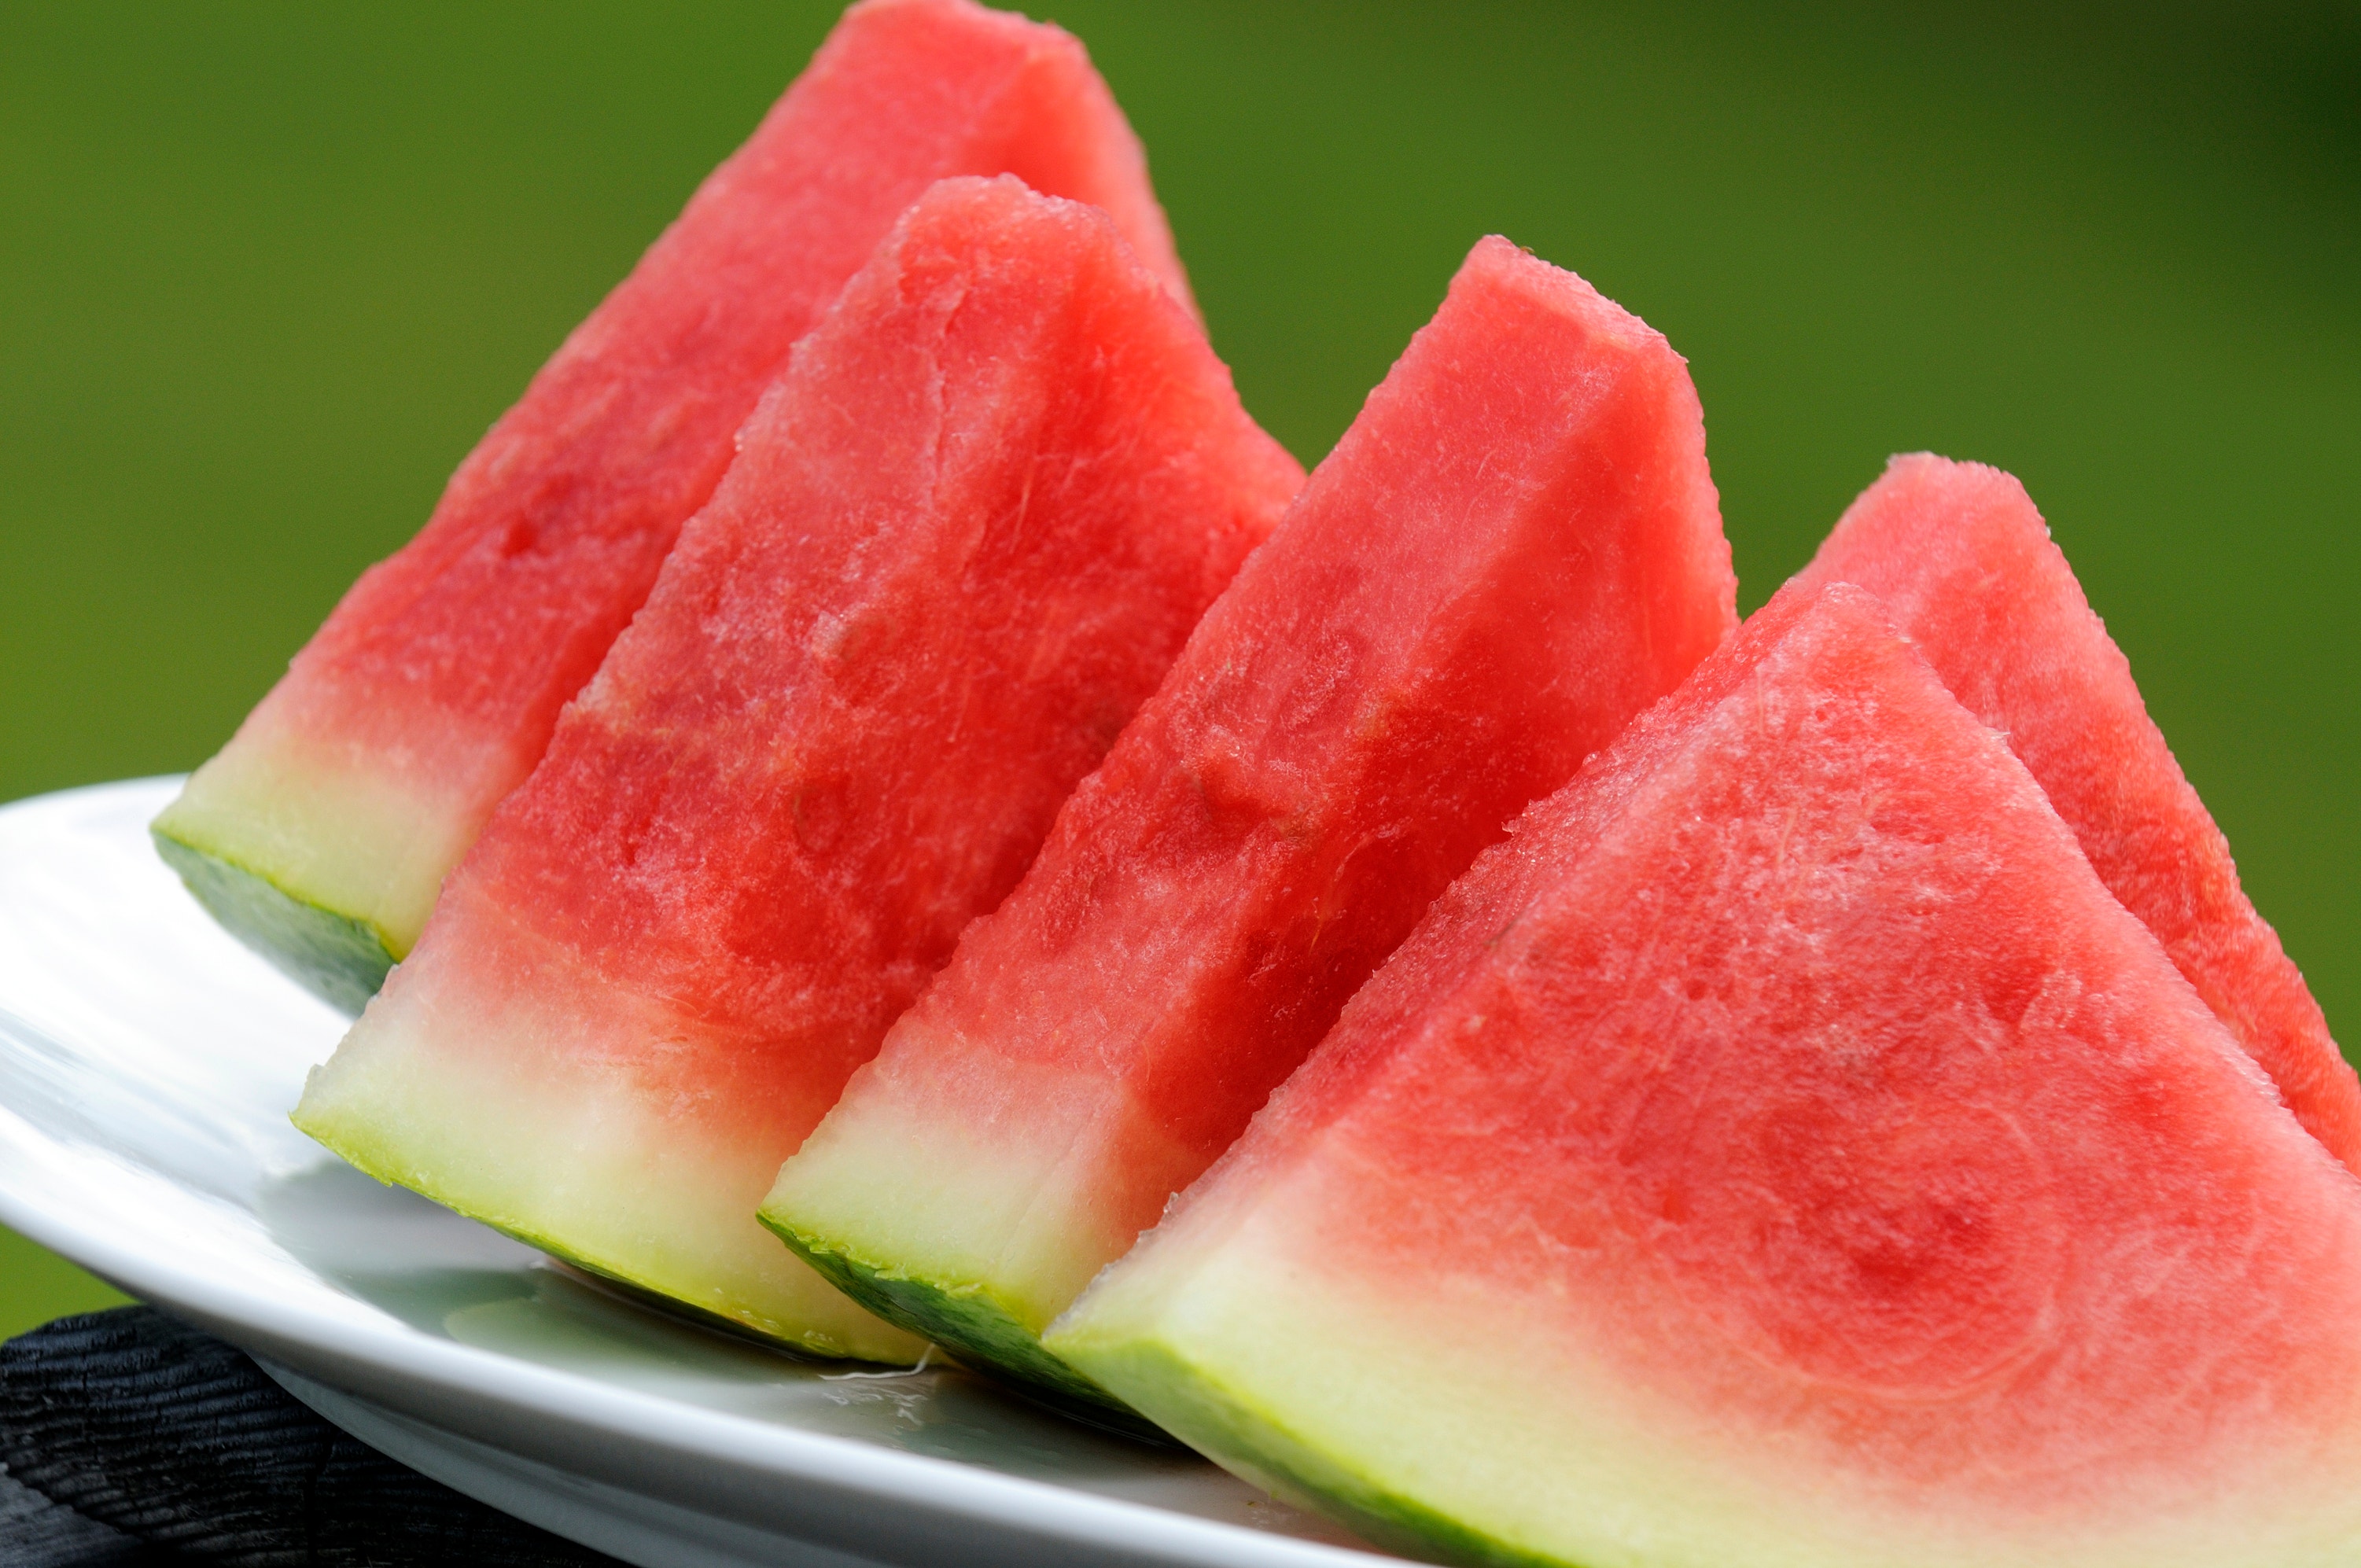 If you're not salting your watermelon, apparently you're eating it the wrong way